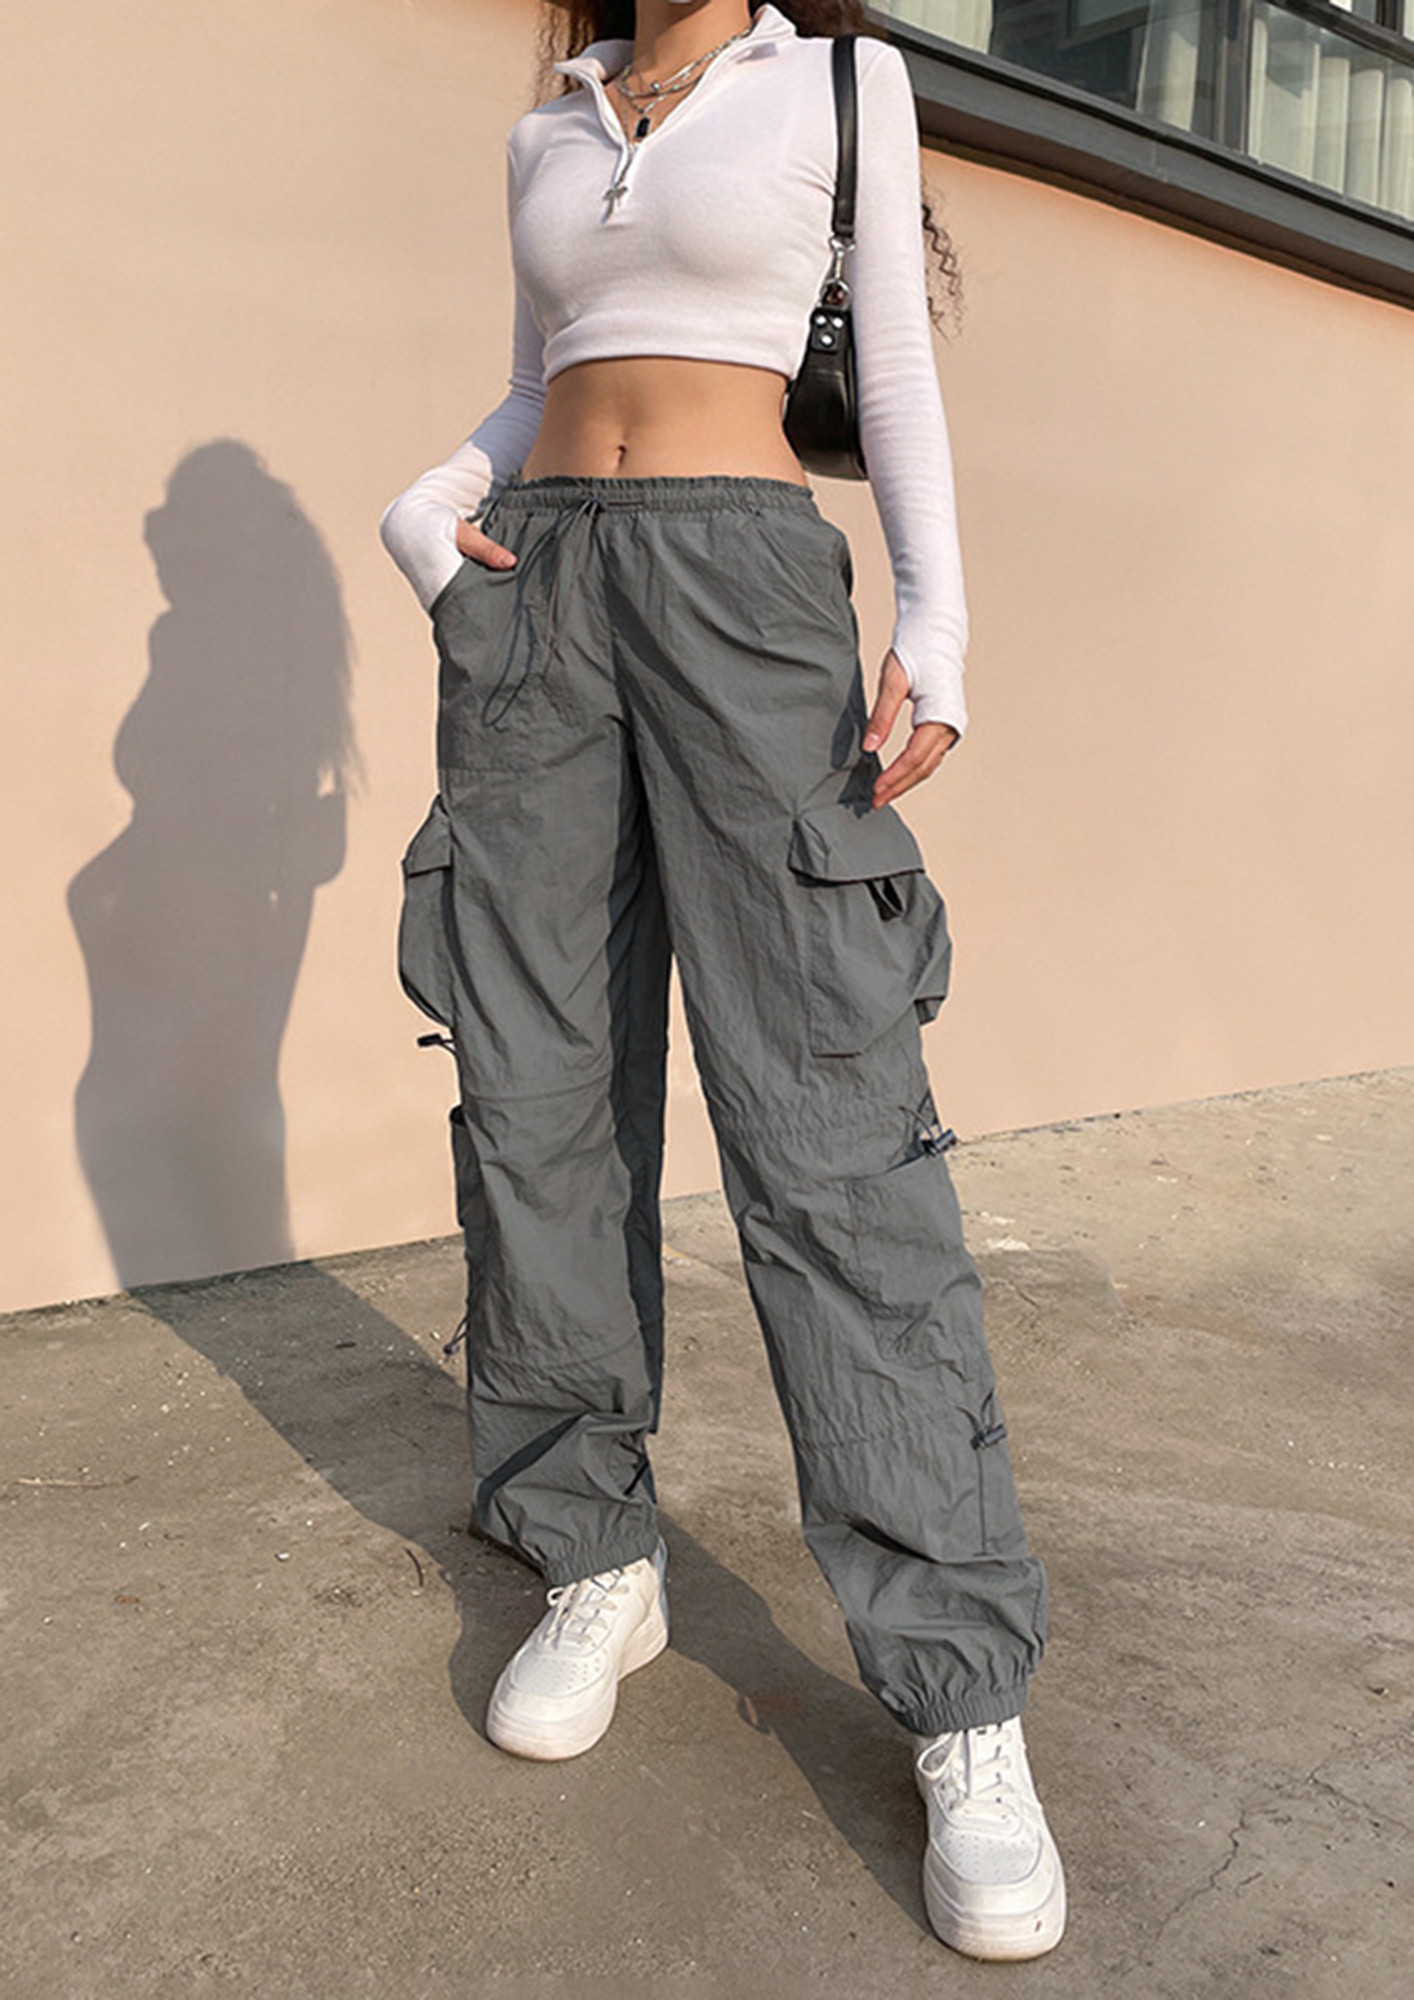 Display more than 152 cargo pants for women